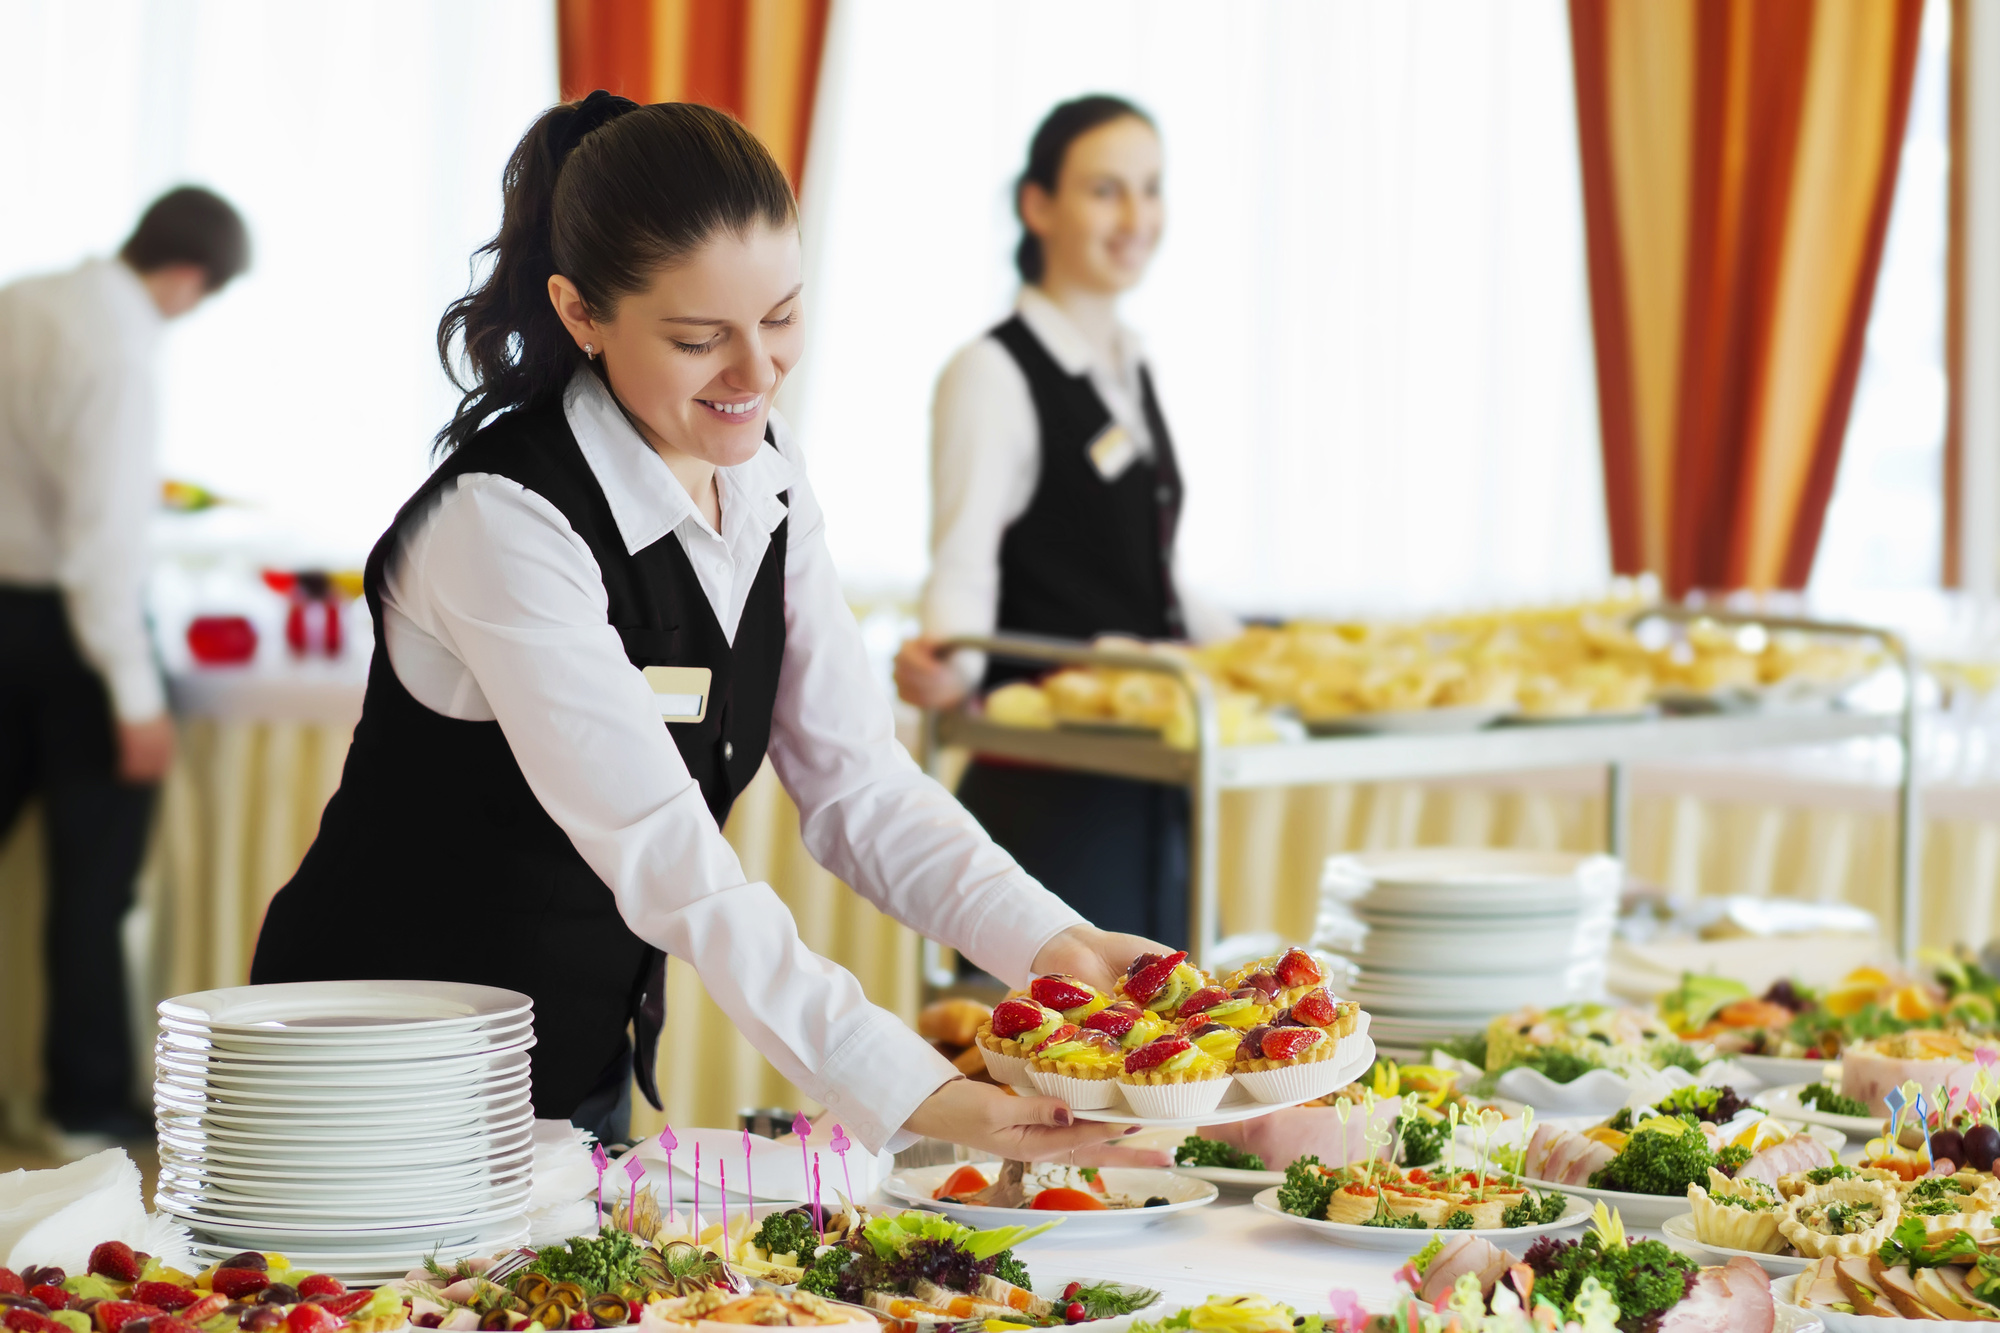 Things Every Catering Service Needs